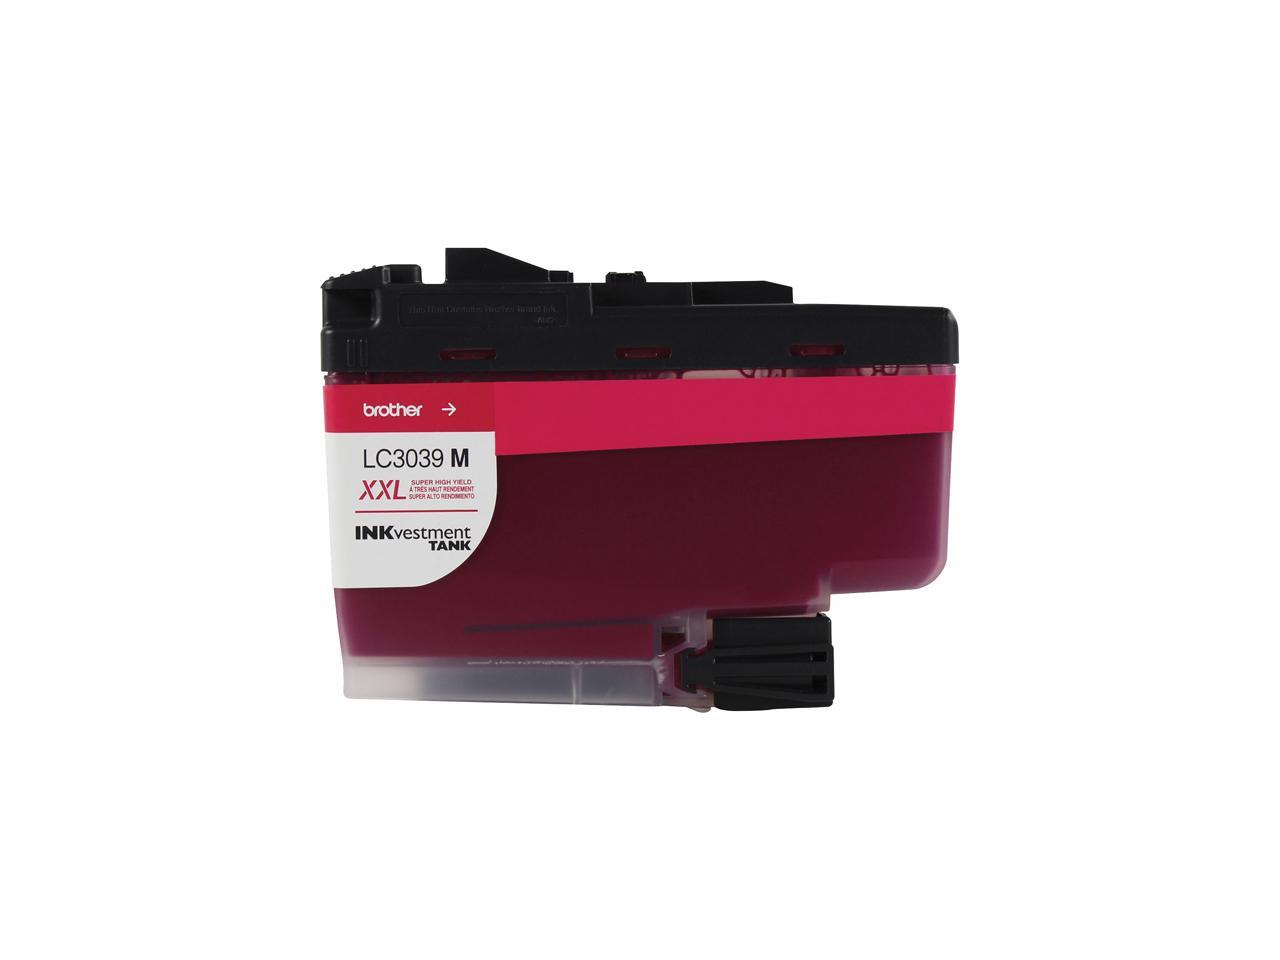 Brother LC3039M Ultra High Yield INKvestment Ink Cartridge - Magenta